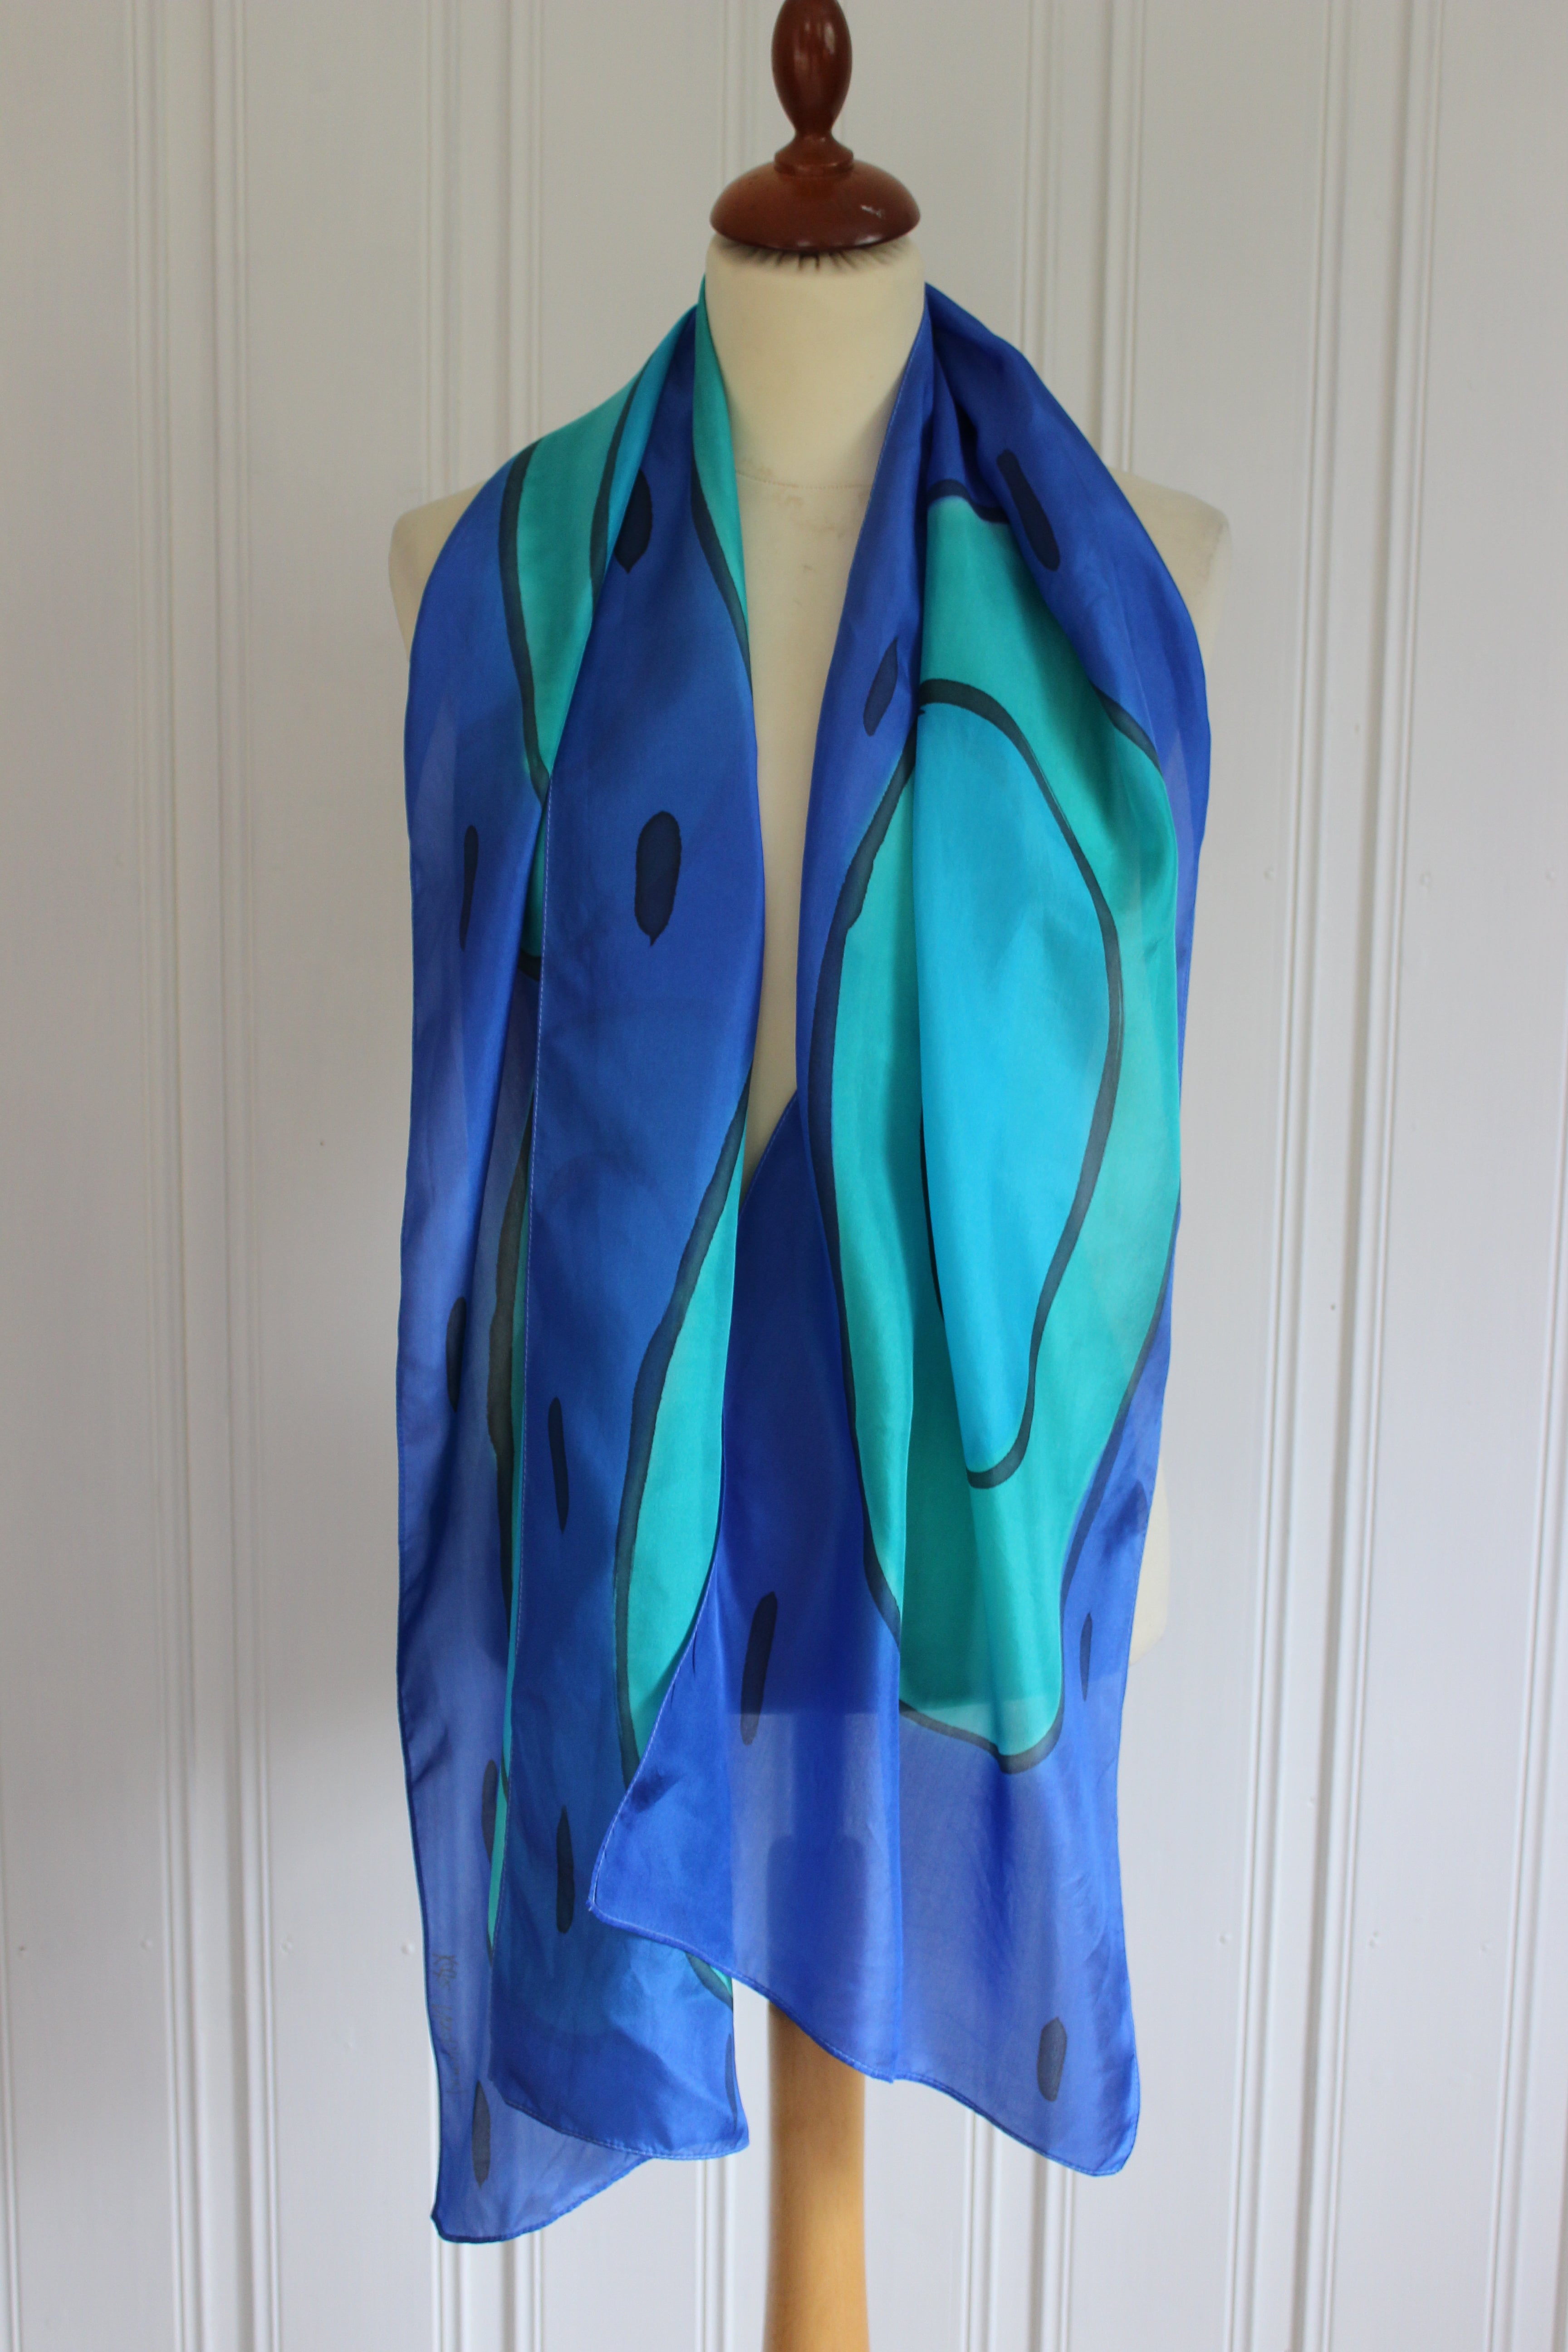 Hand painted silk scarf 4158